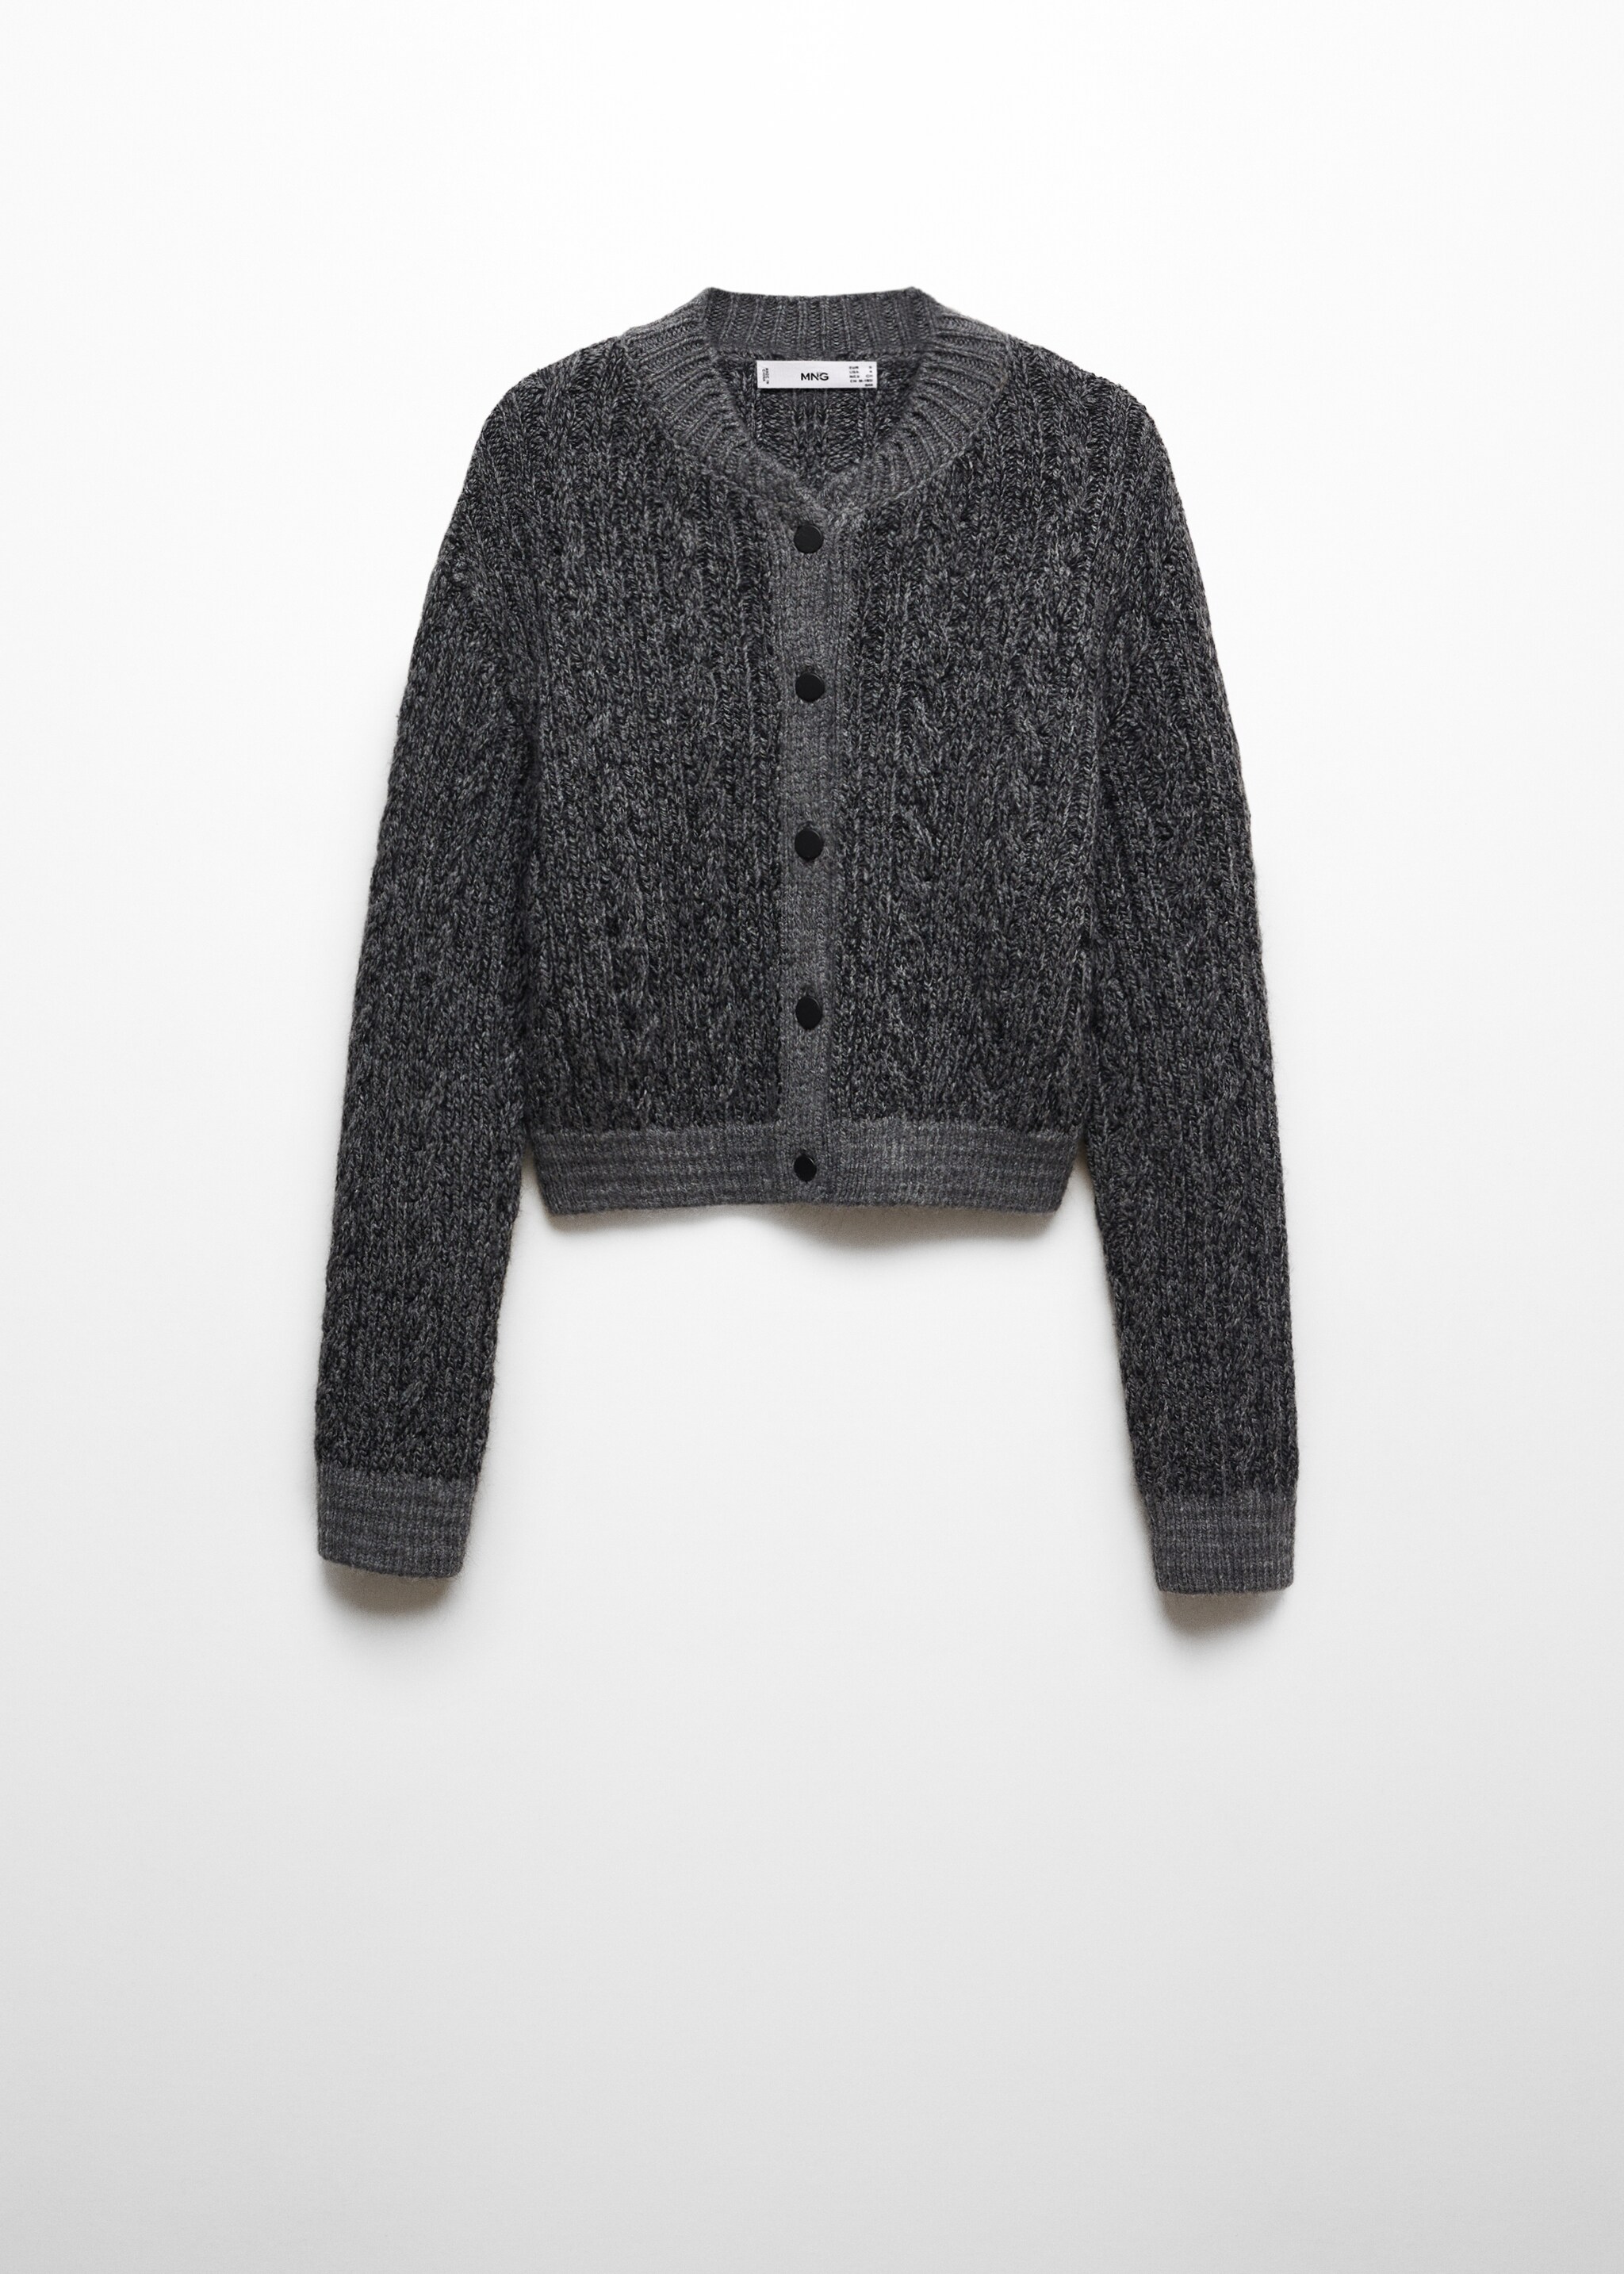 Button knit cardigan - Article without model